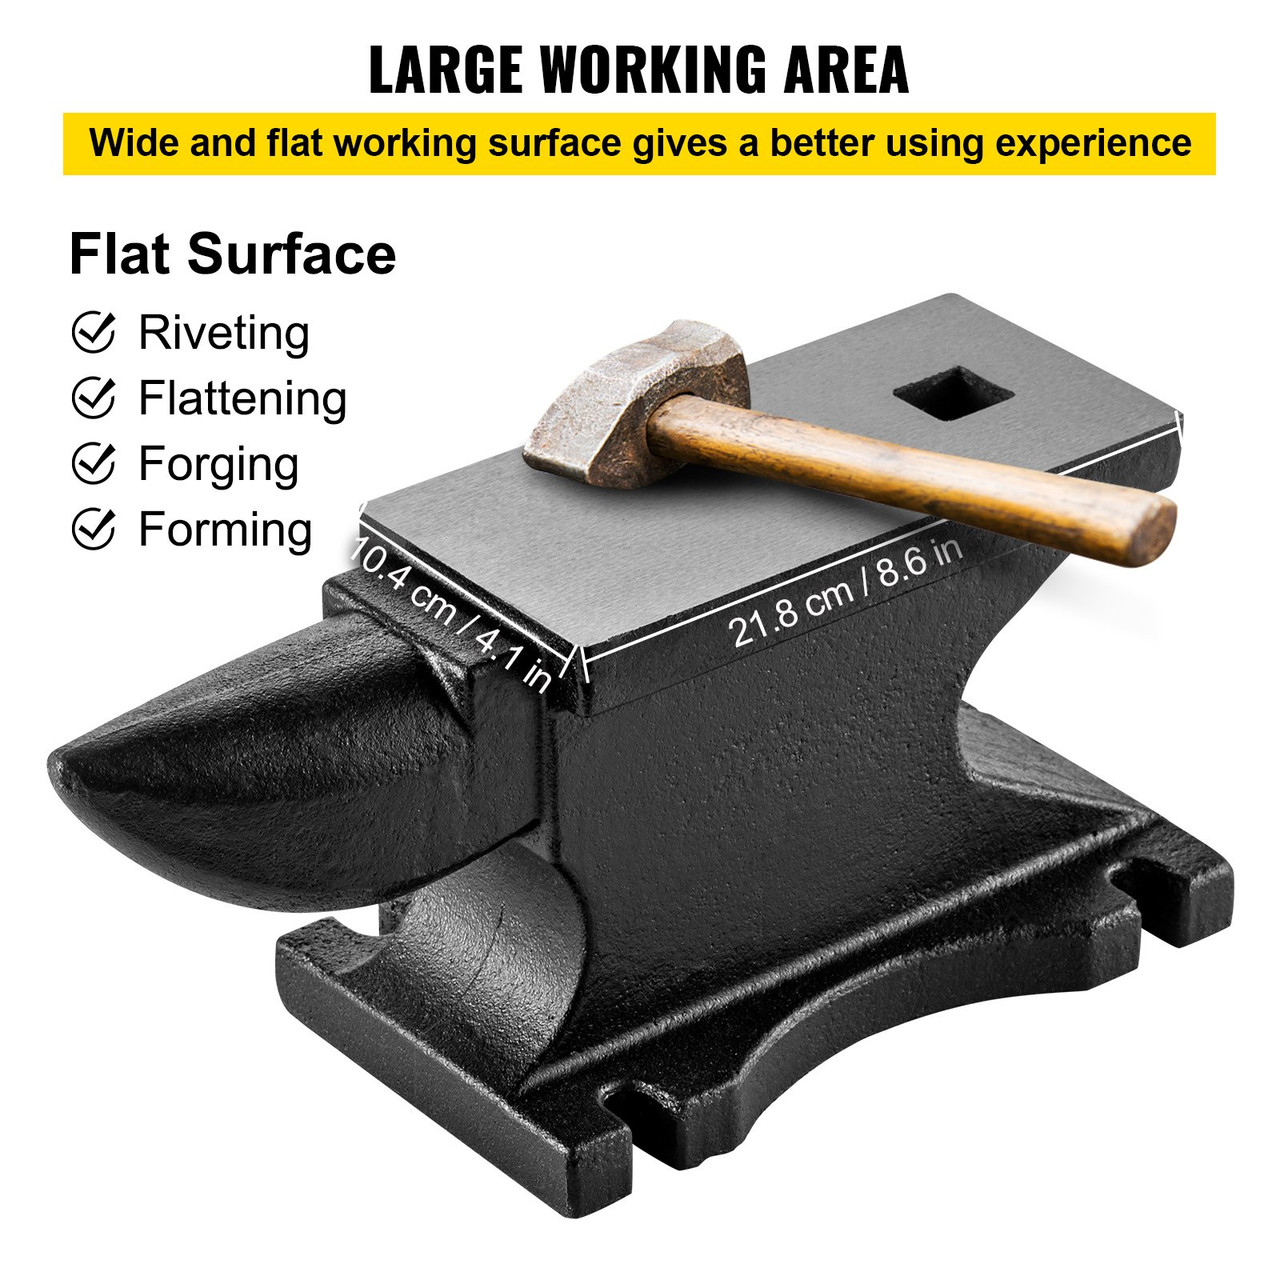 Cast Iron Anvil, 55 Lbs(25kg) Single Horn Anvil with 8.6 x 4.1 inch Countertop and Stable Base, High Hardness Rugged Round Horn Anvil Blacksmith, for Bending, Shaping, Twisting